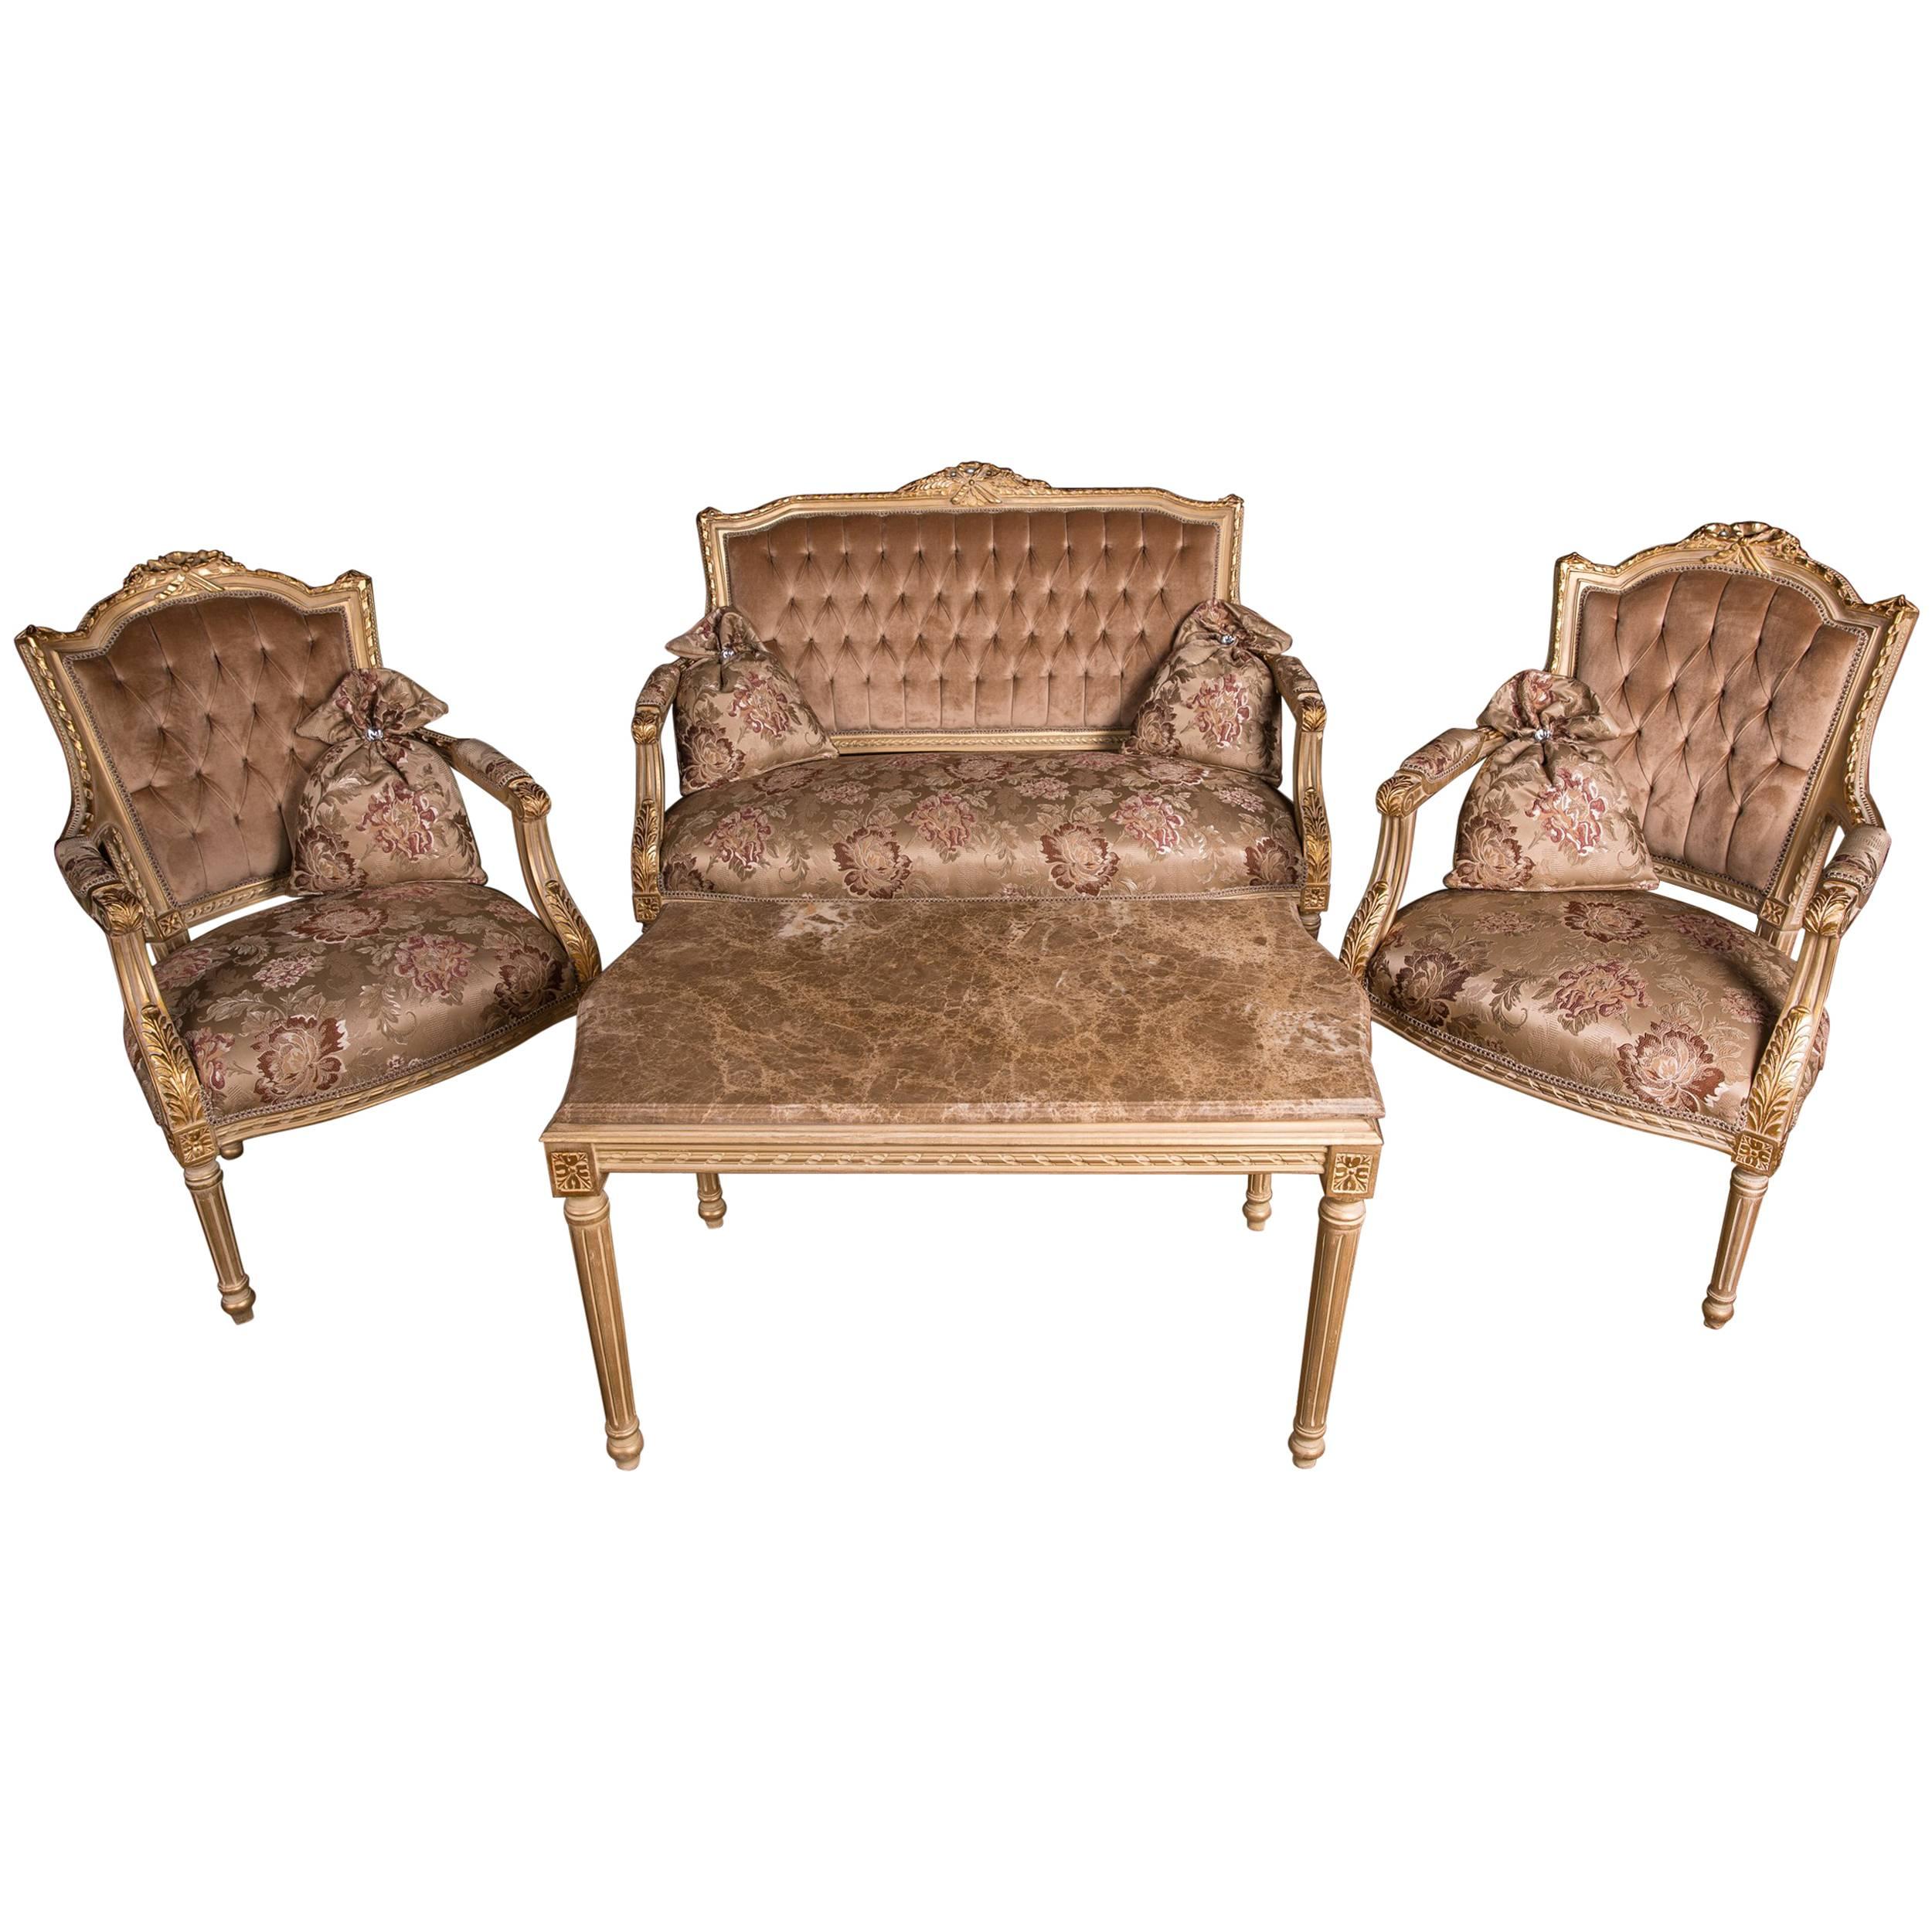 Classic French Seating Set Sofa and Two Armchairs in the Louis Seize Style